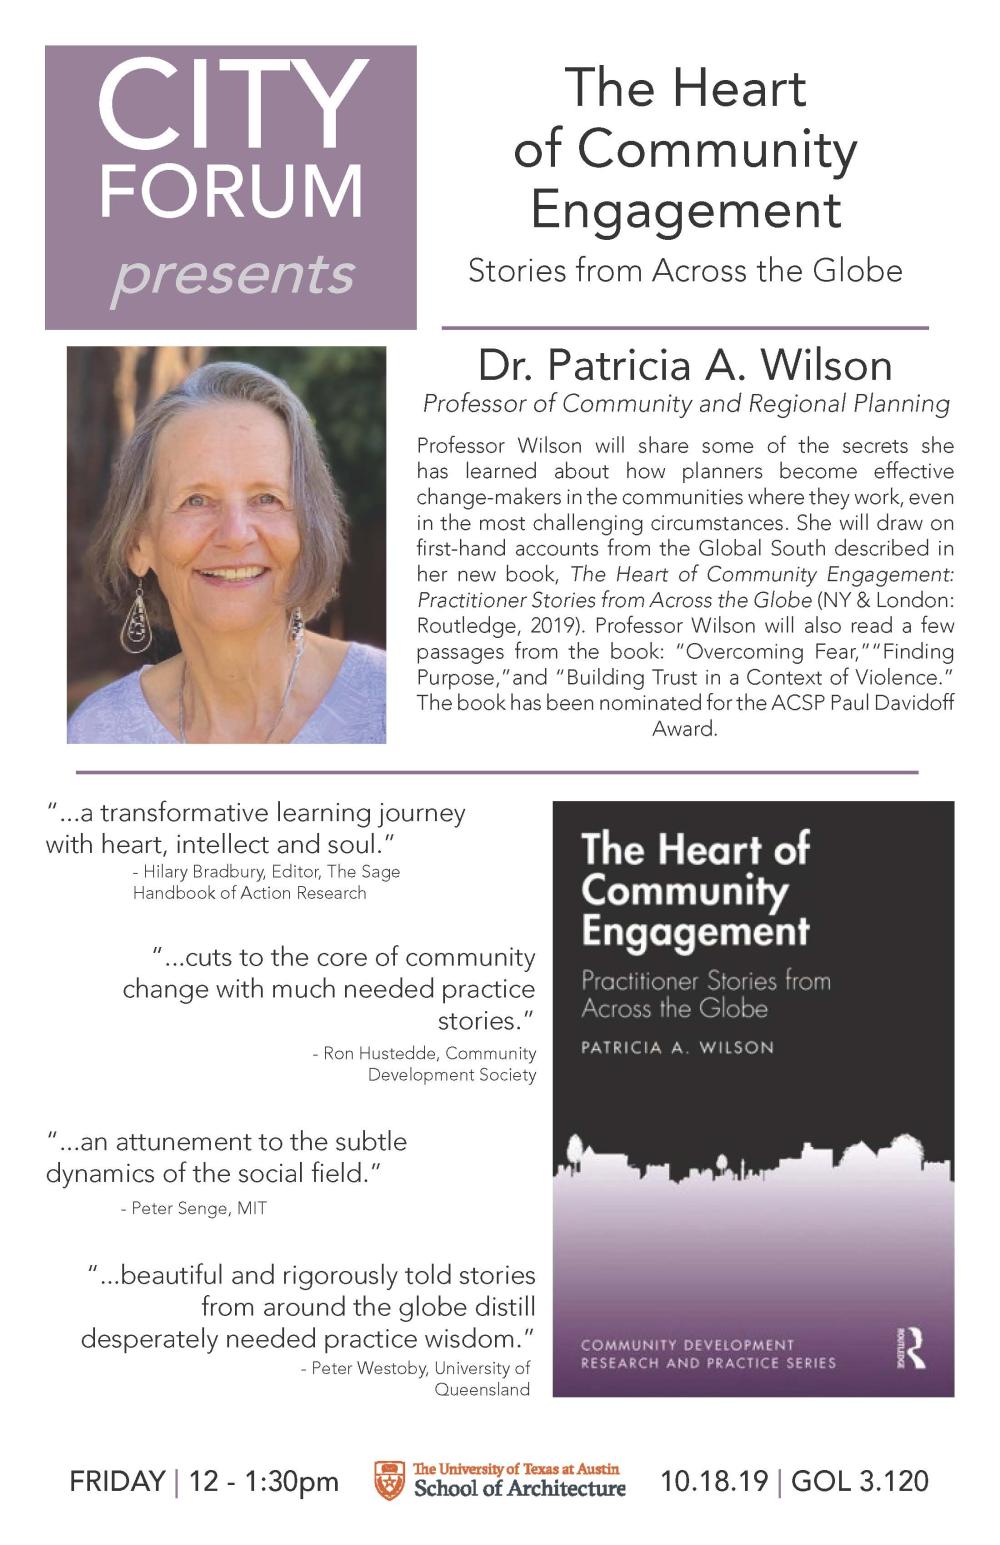 Image of City Forum poster featuring Dr. Patricia Wilson and the cover of her book, The Heart of Community Engagement: Practitioner Stories from Across the Globe